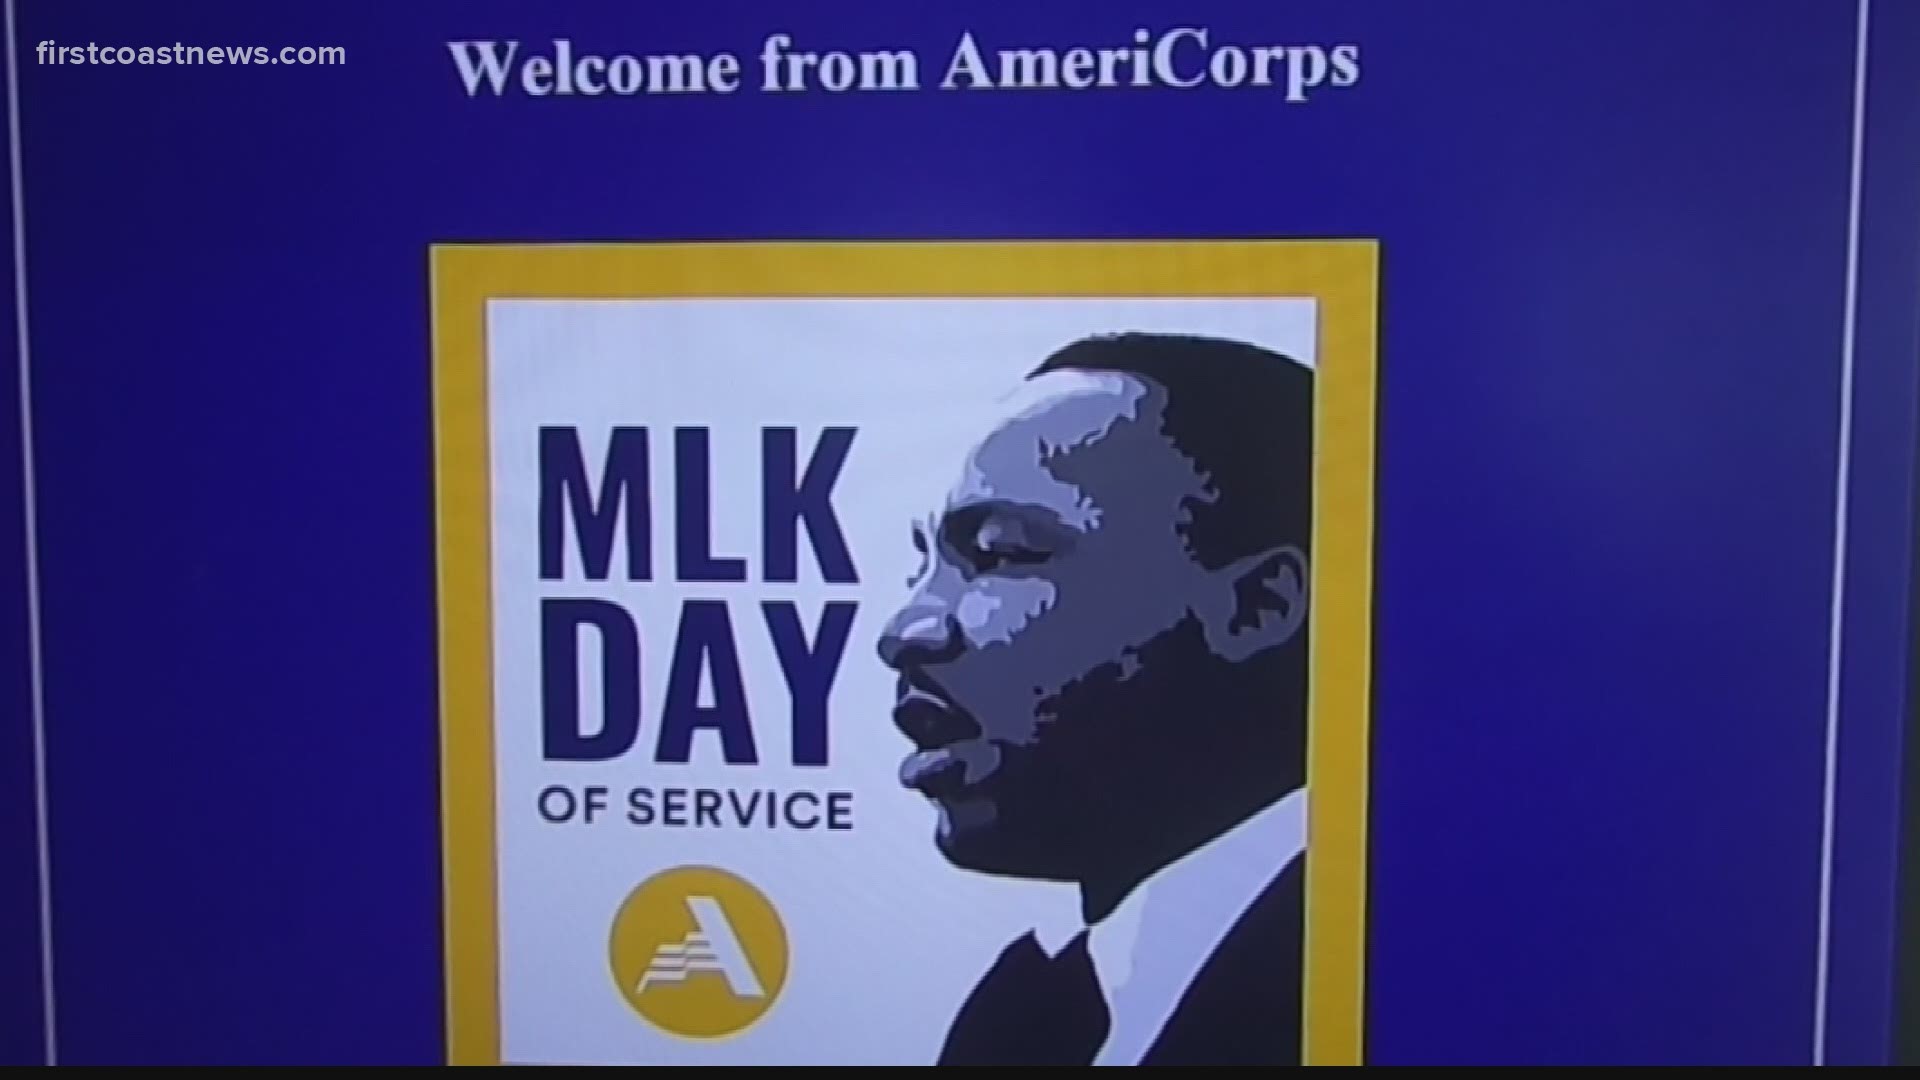 As the COVID-19 pandemic continues, many events for Martin Luther King Day went virtual. But some found ways to go out to better their community through service.